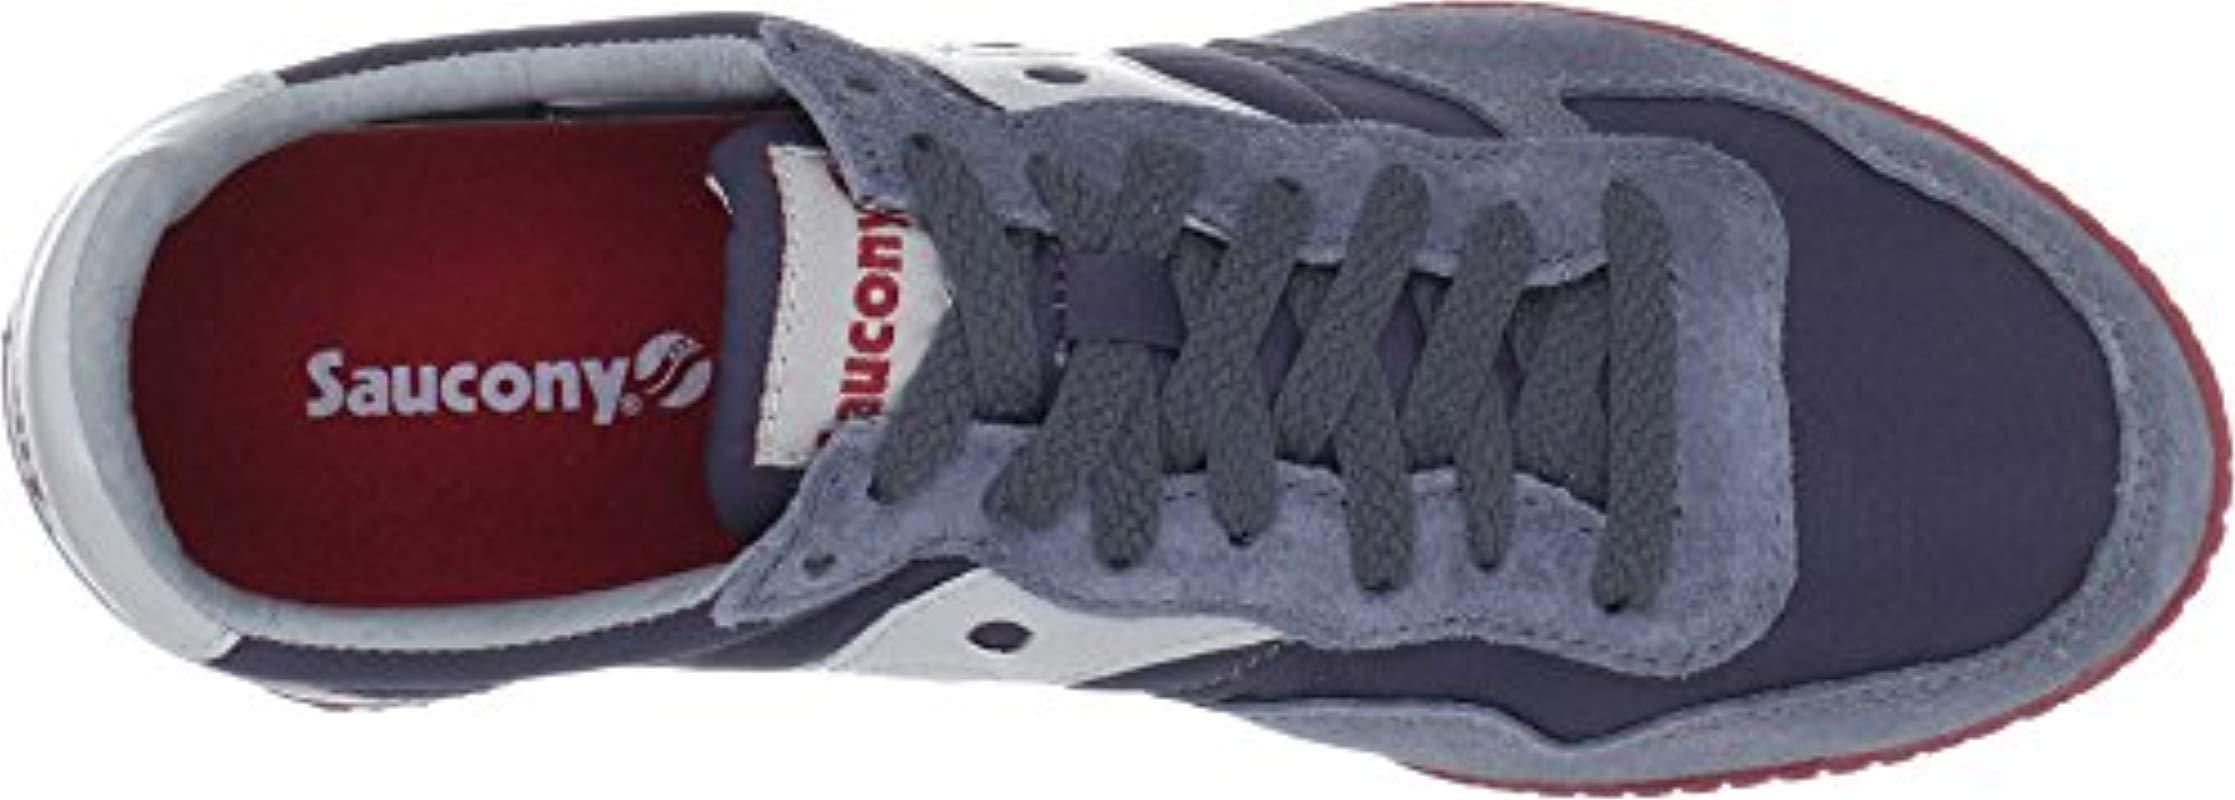 saucony bullet charcoal red